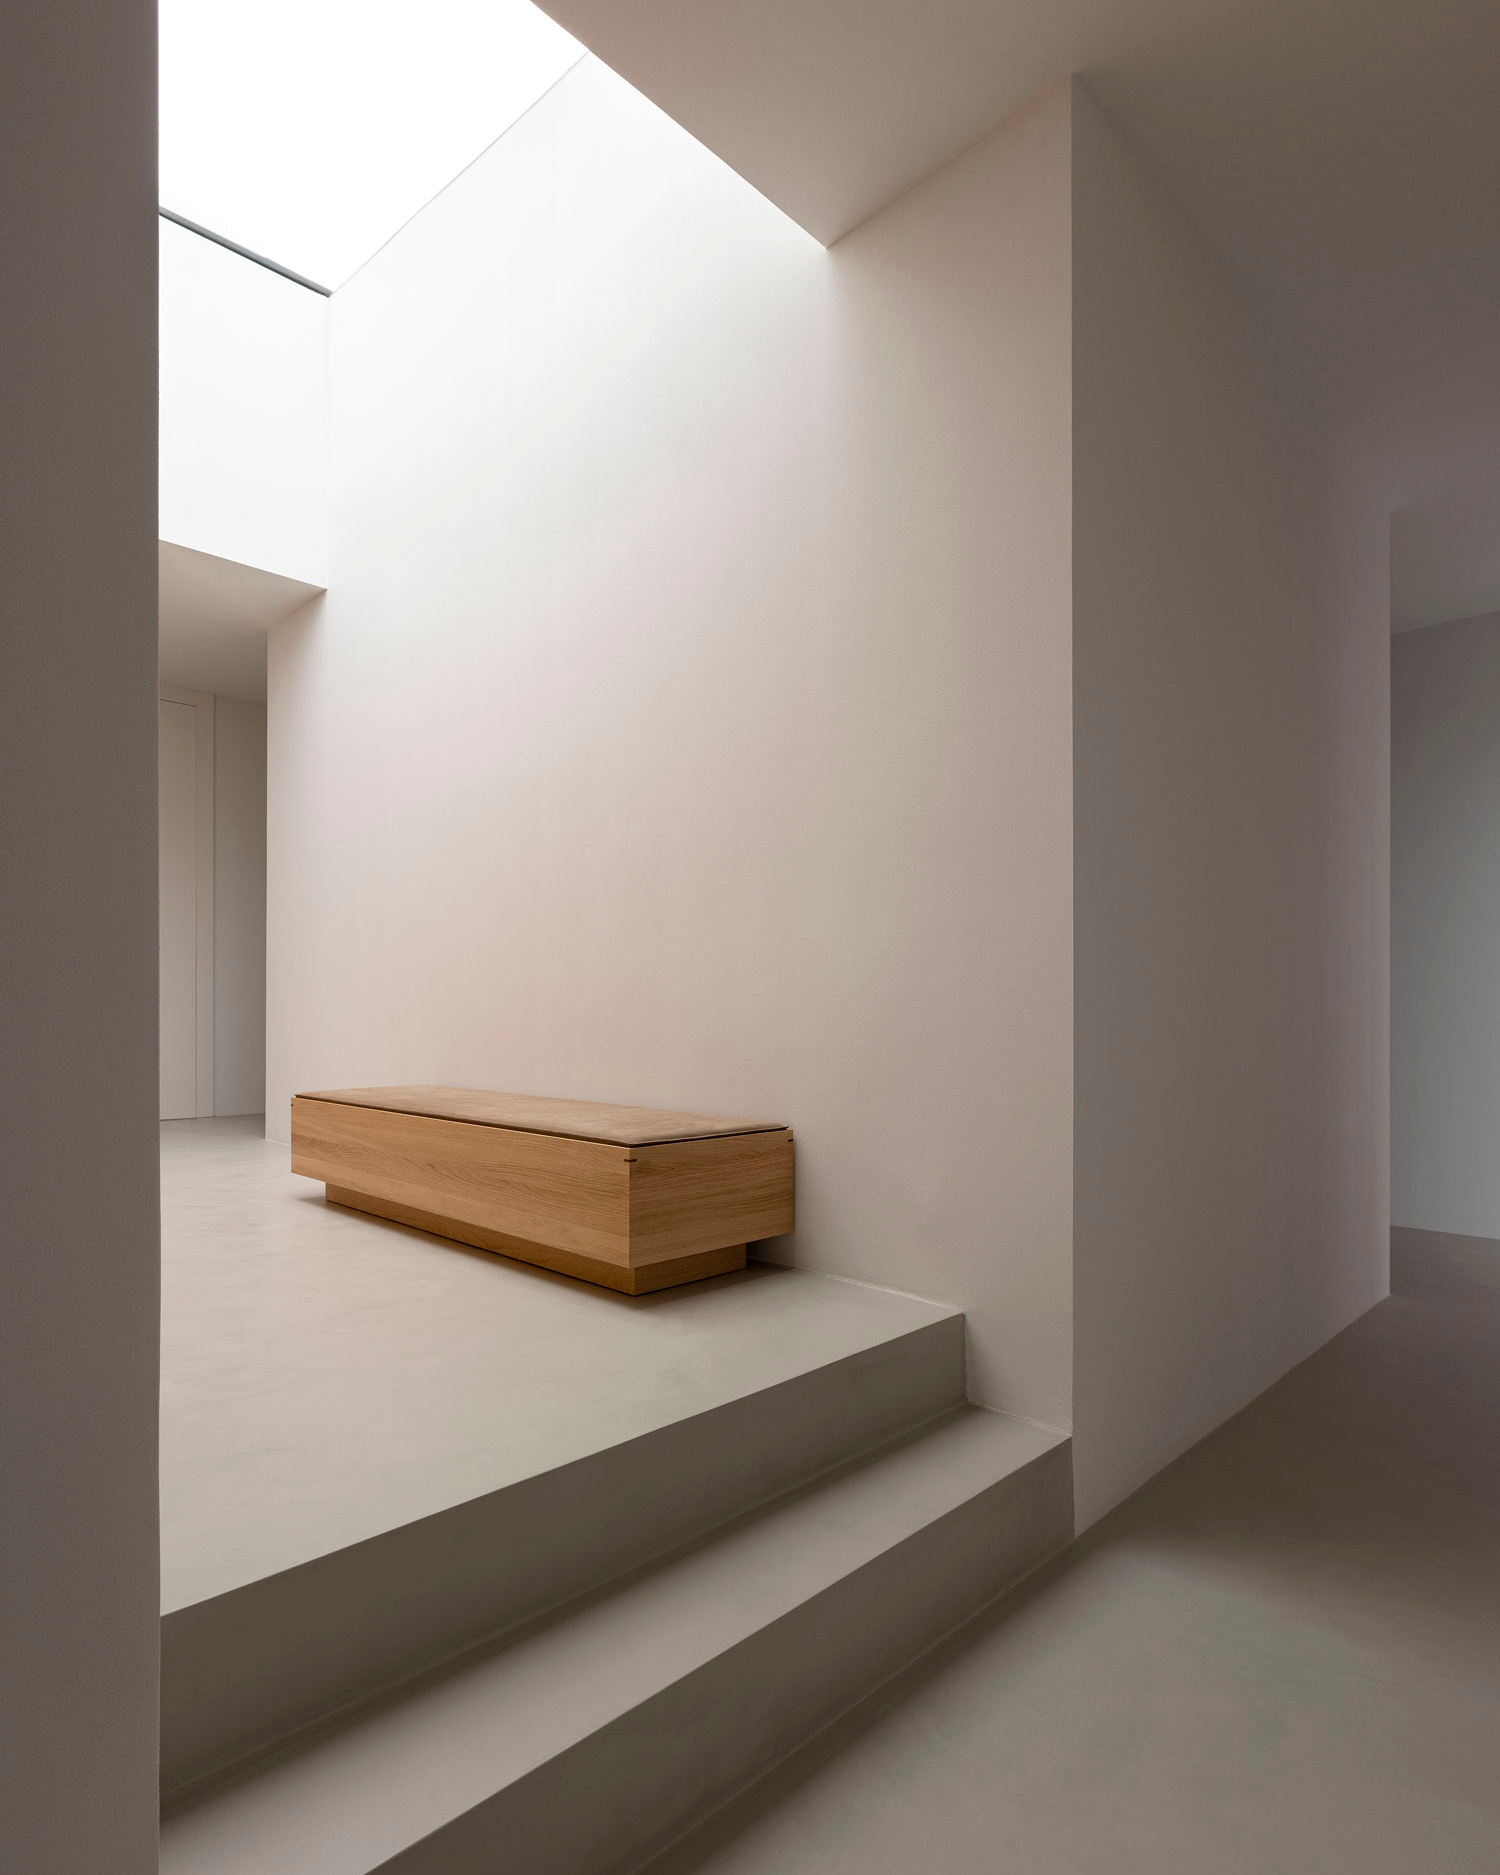 Koio and Norm Architects partnered to create a bespoke bench that complements the interior.